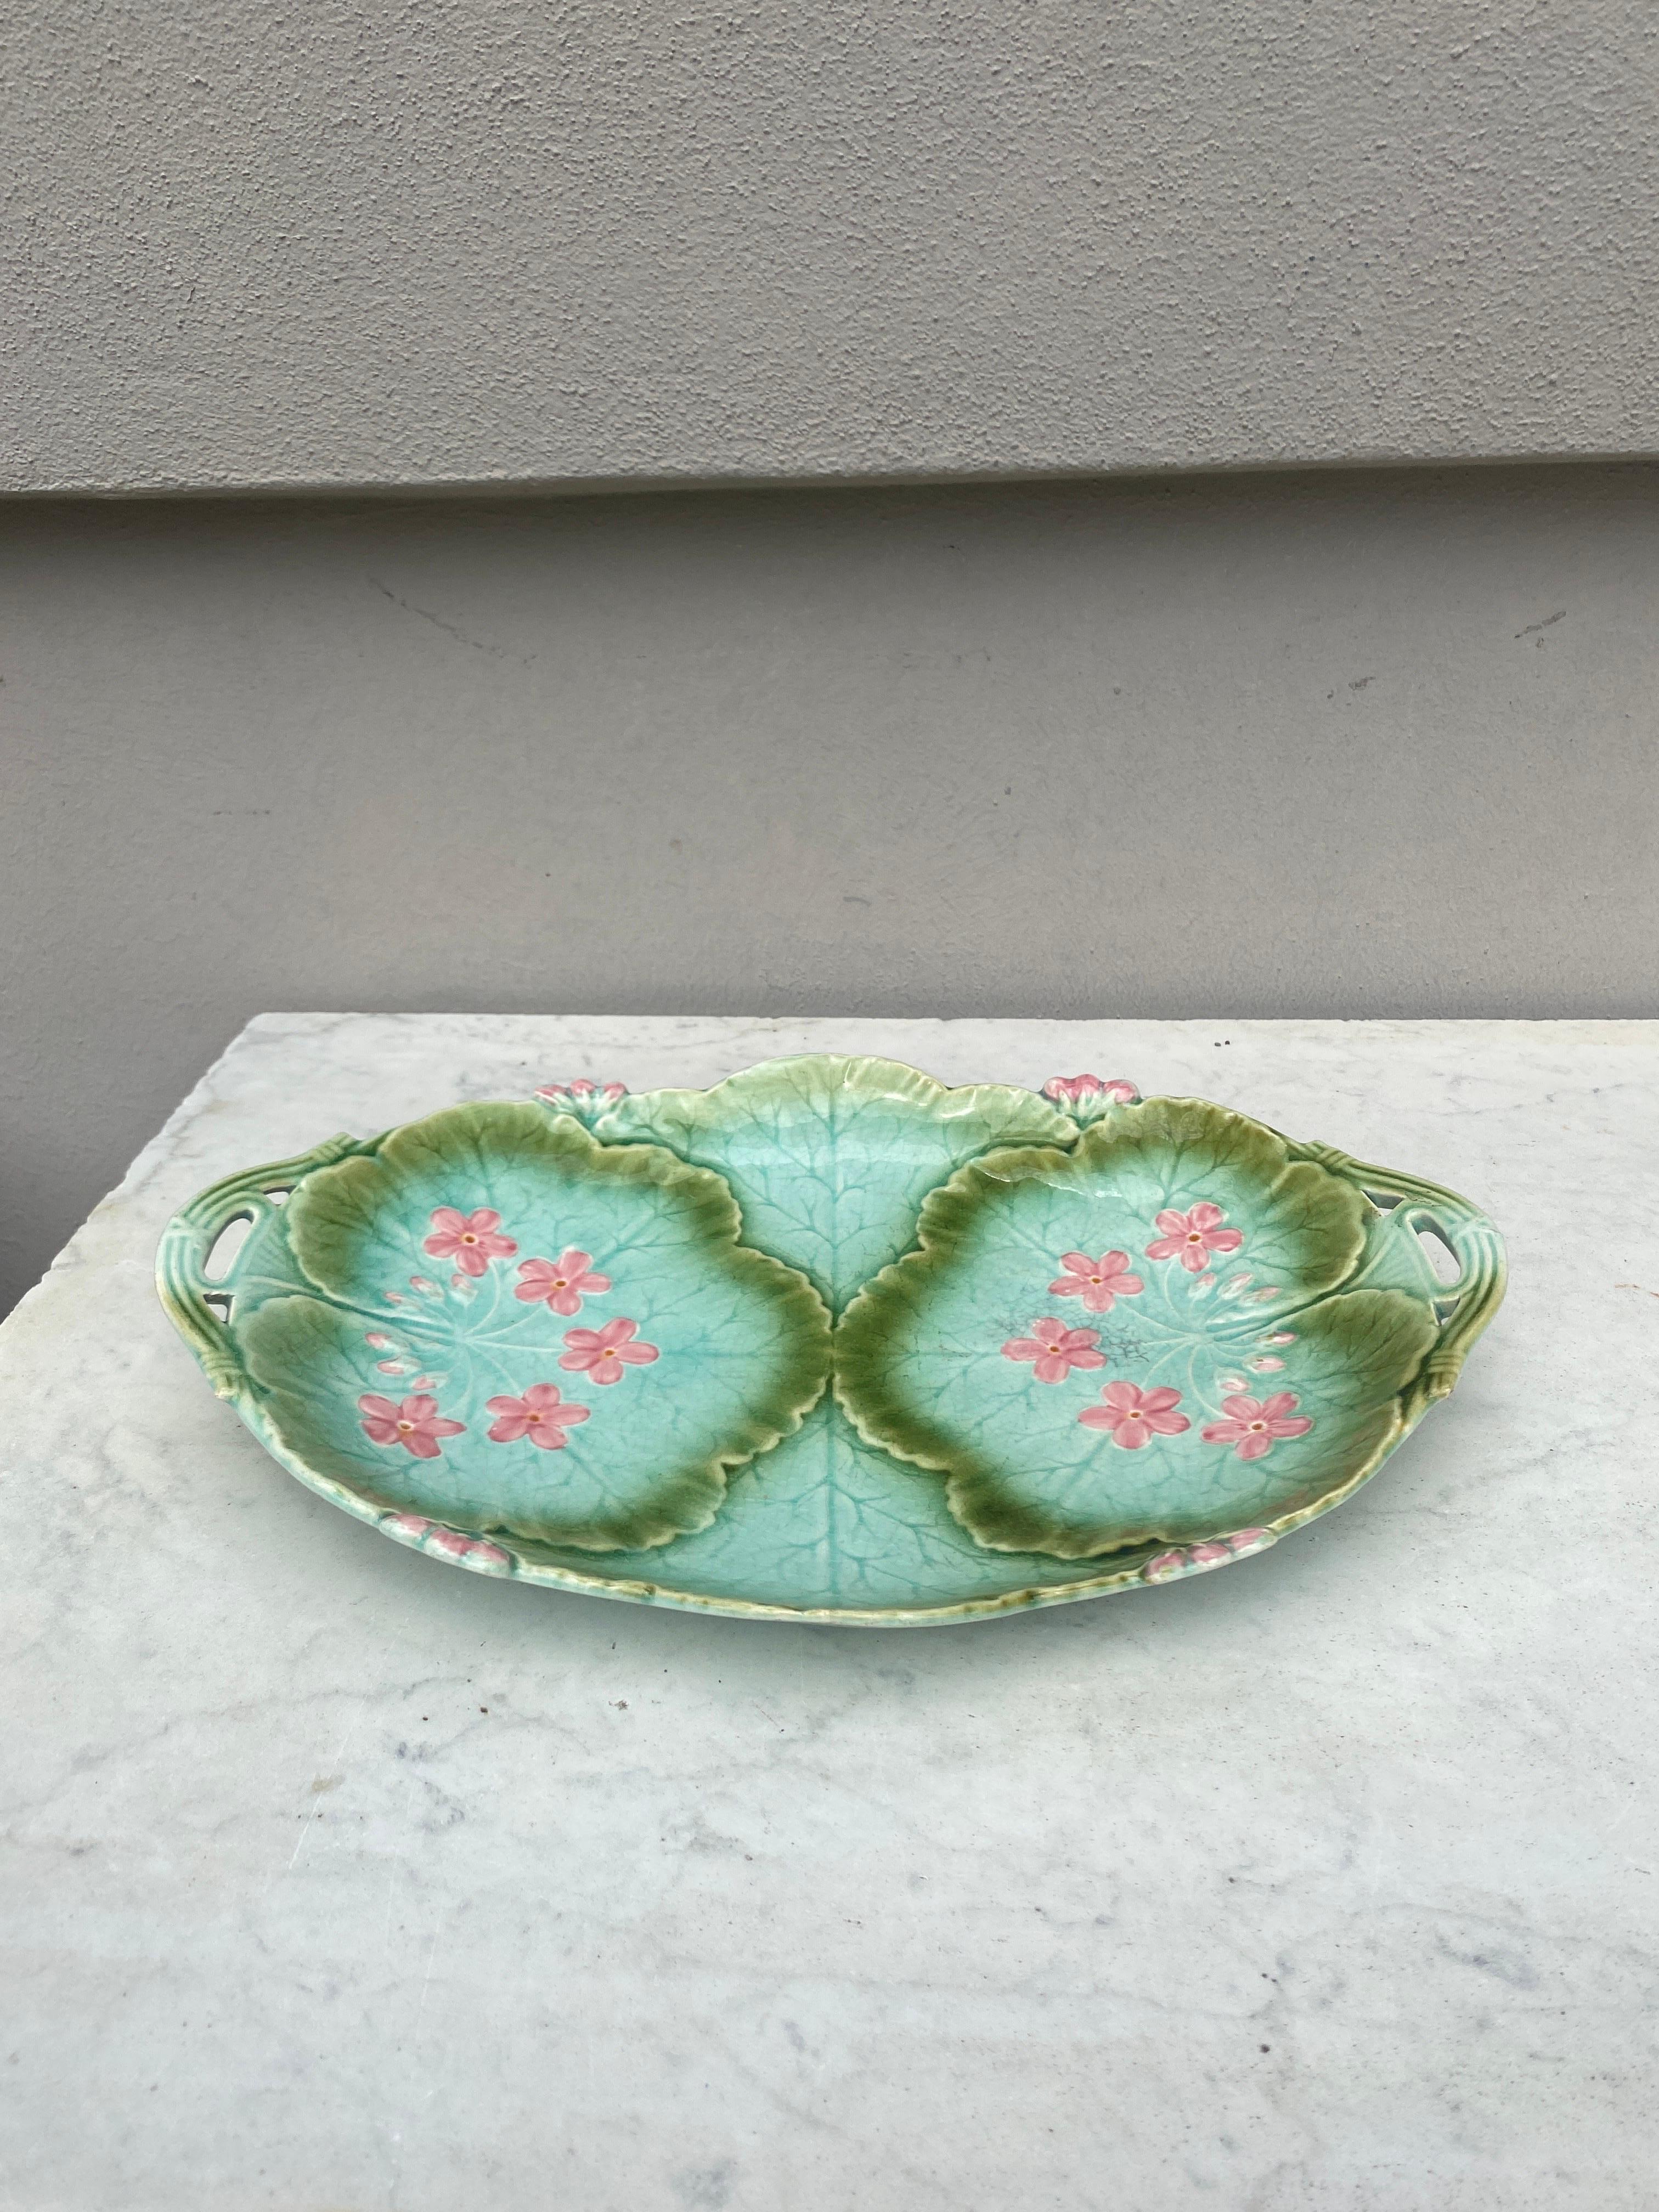 Majolica Flowers Platter Sarreguemines Circa 1880 In Good Condition For Sale In Austin, TX